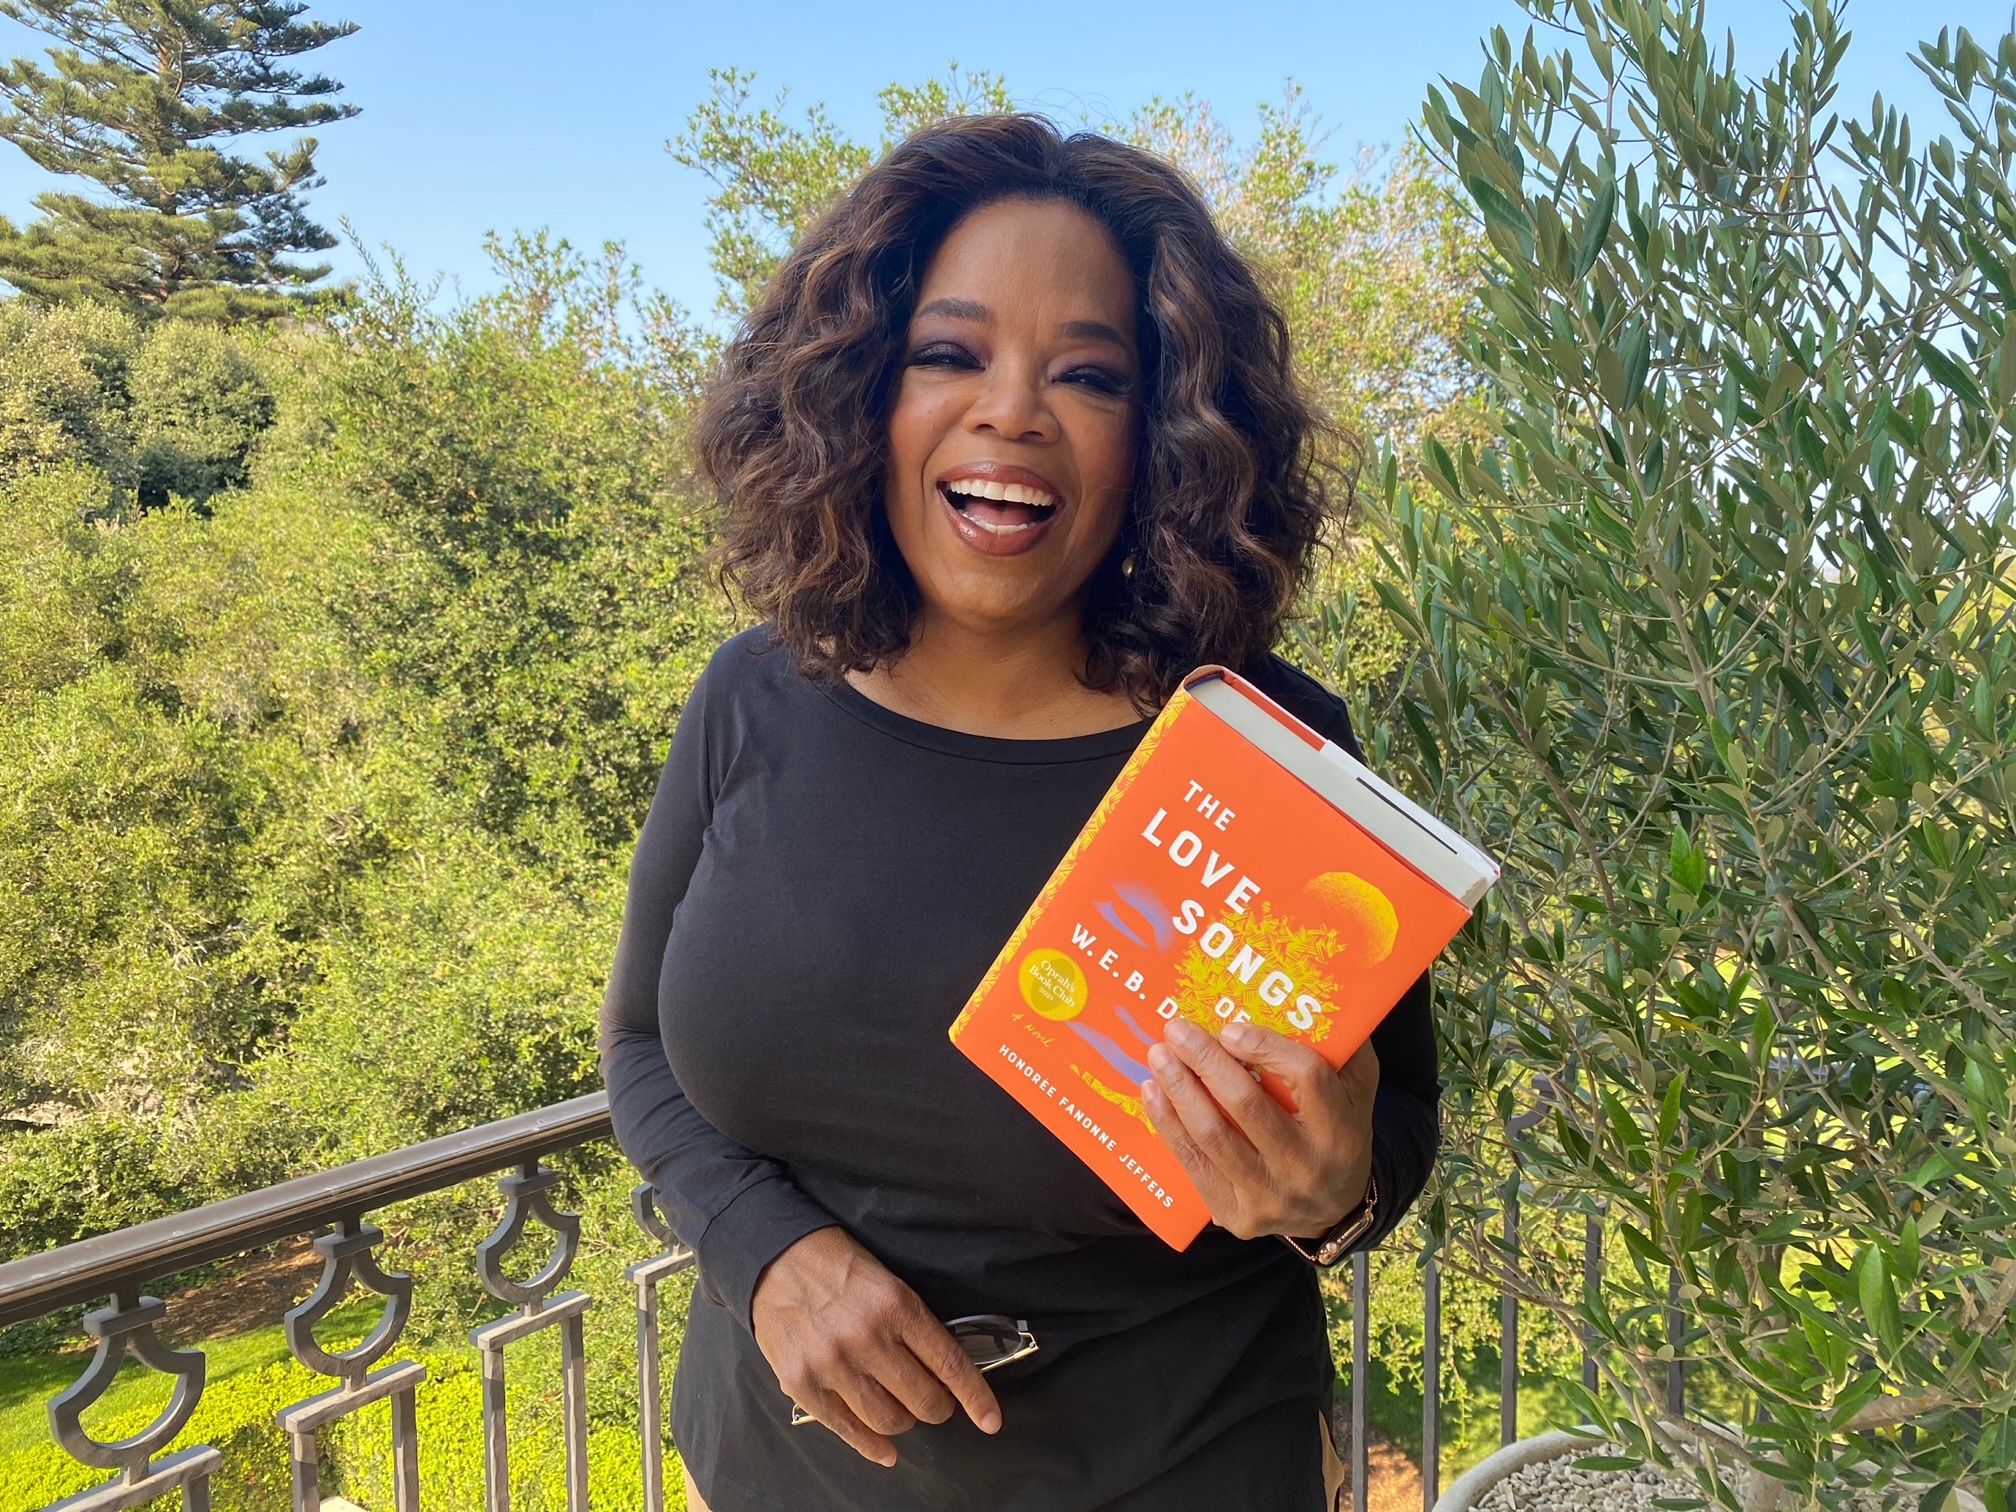 Oprah Daily Live Your Best Life™ Classic Tumbler - The Oprah Daily